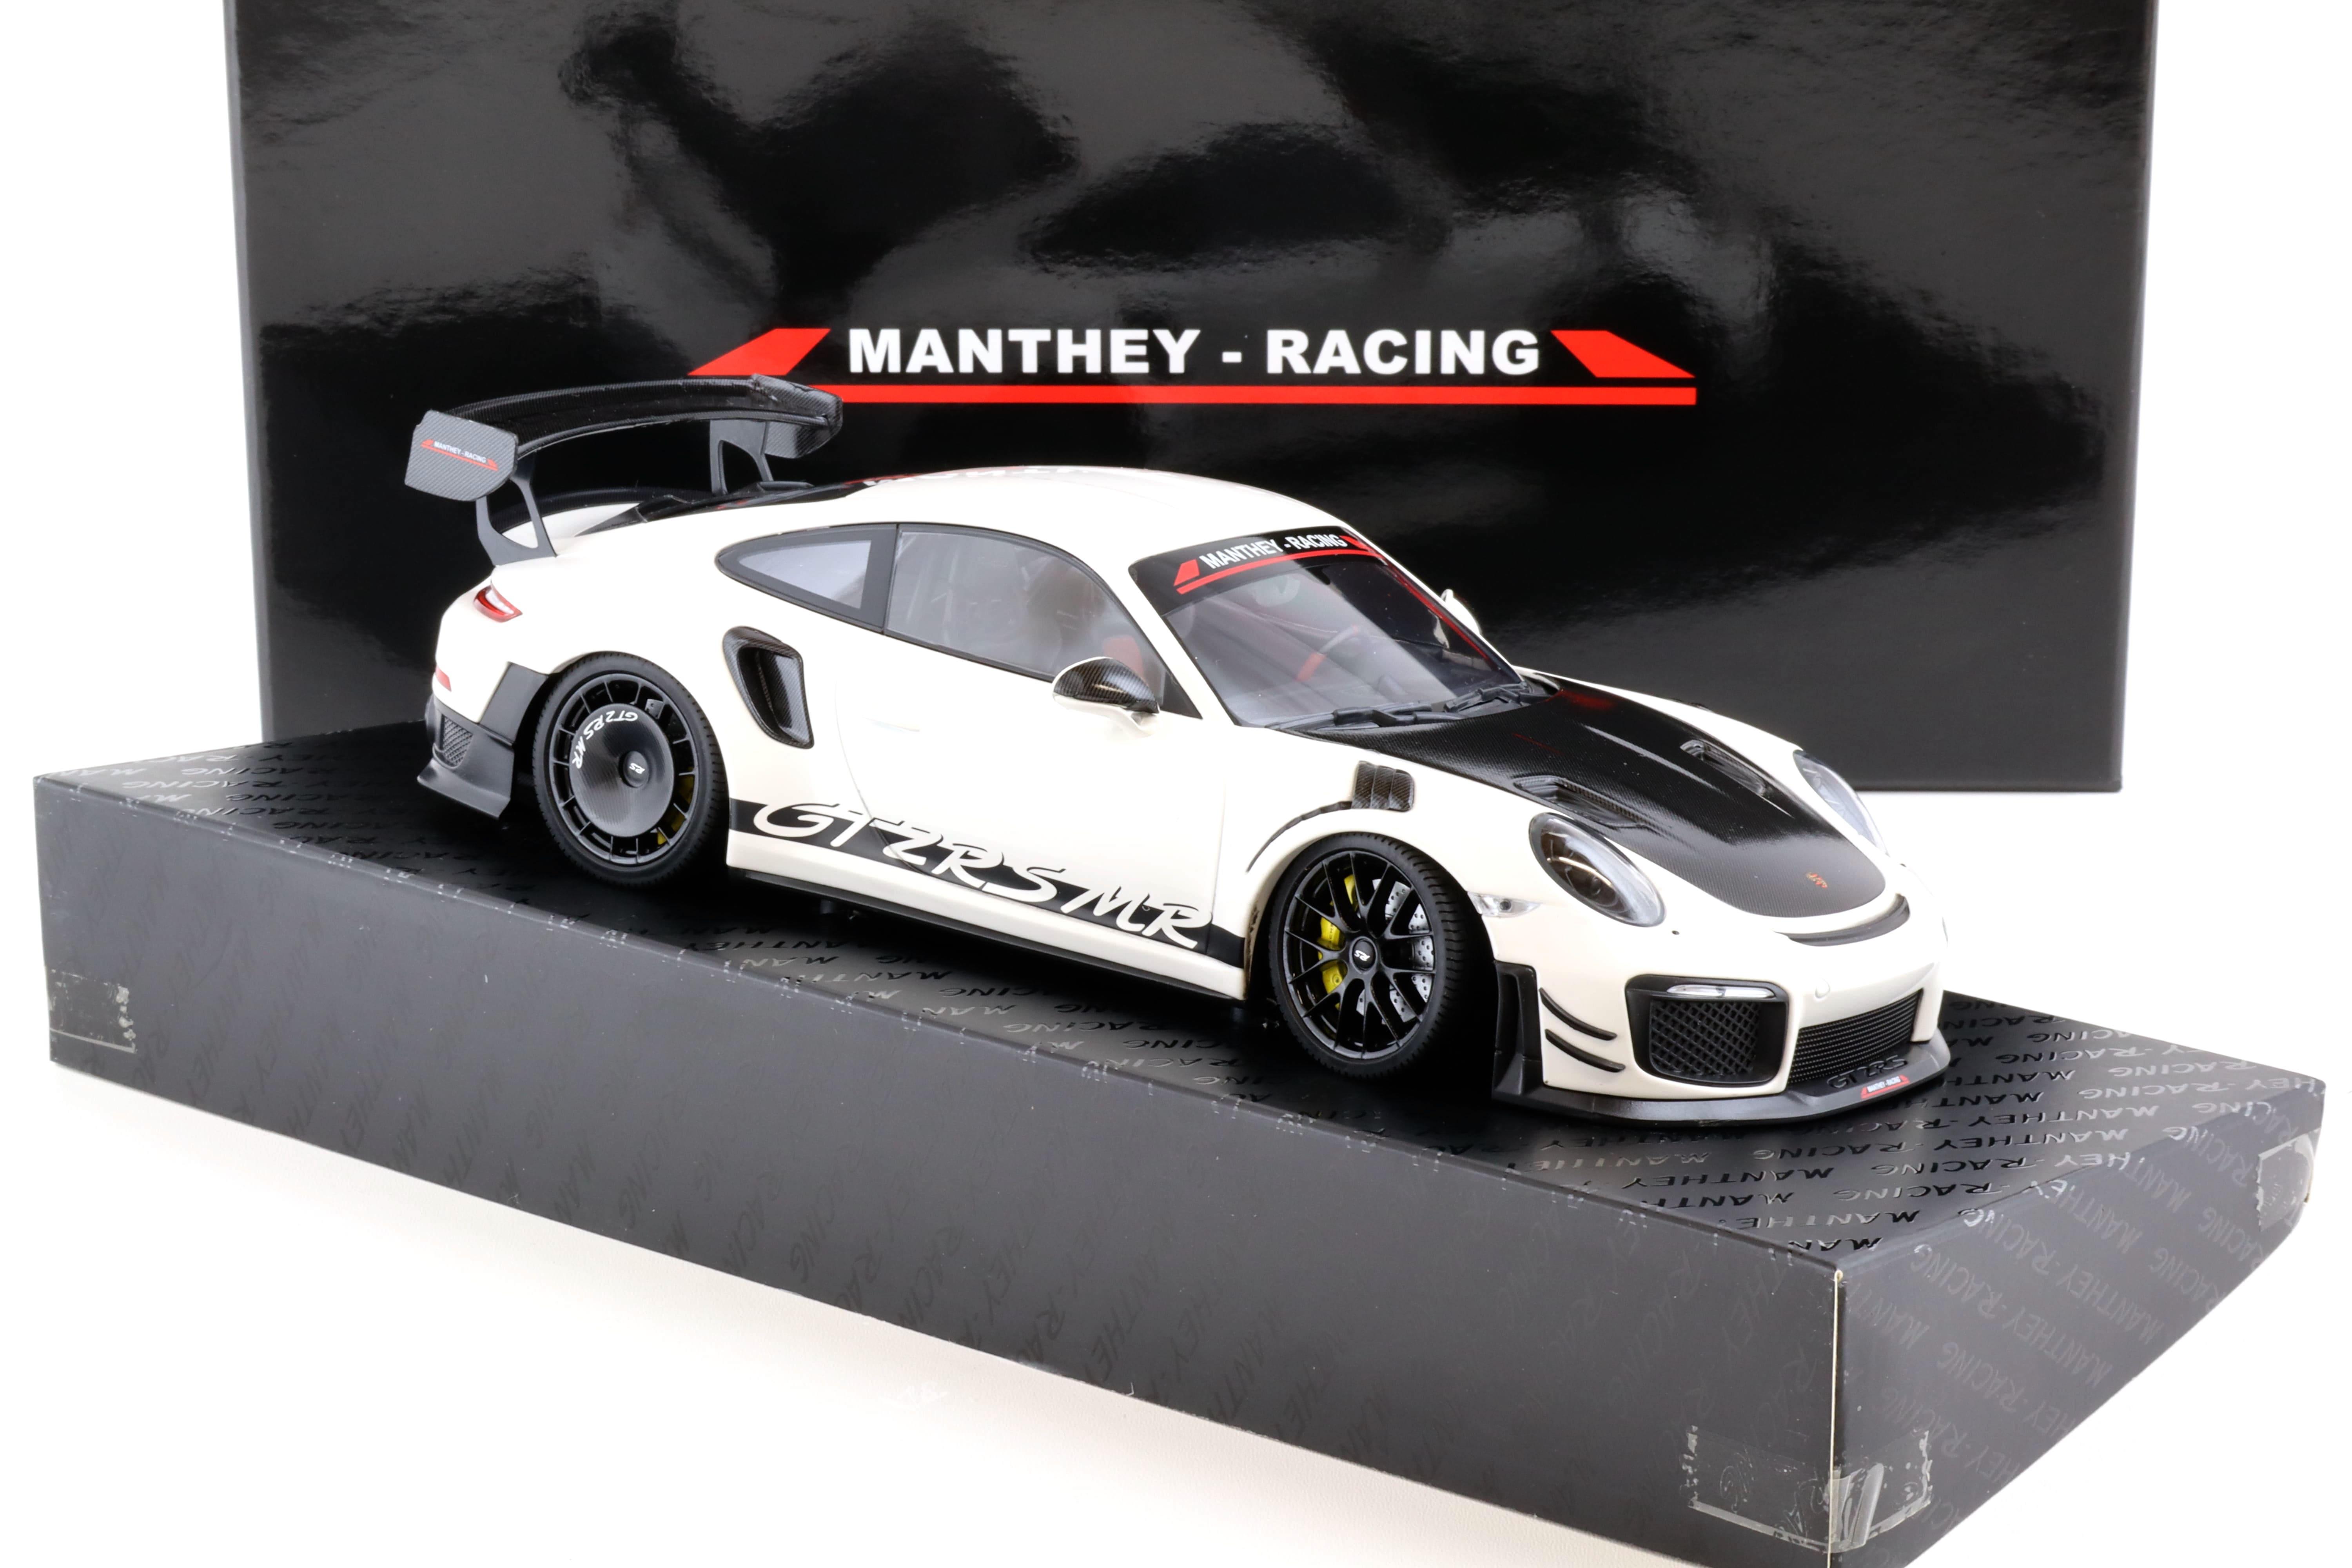 1:18 Minichamps Porsche 911 (991.2) GT2 RS MR white Manthey-Racing Special Box